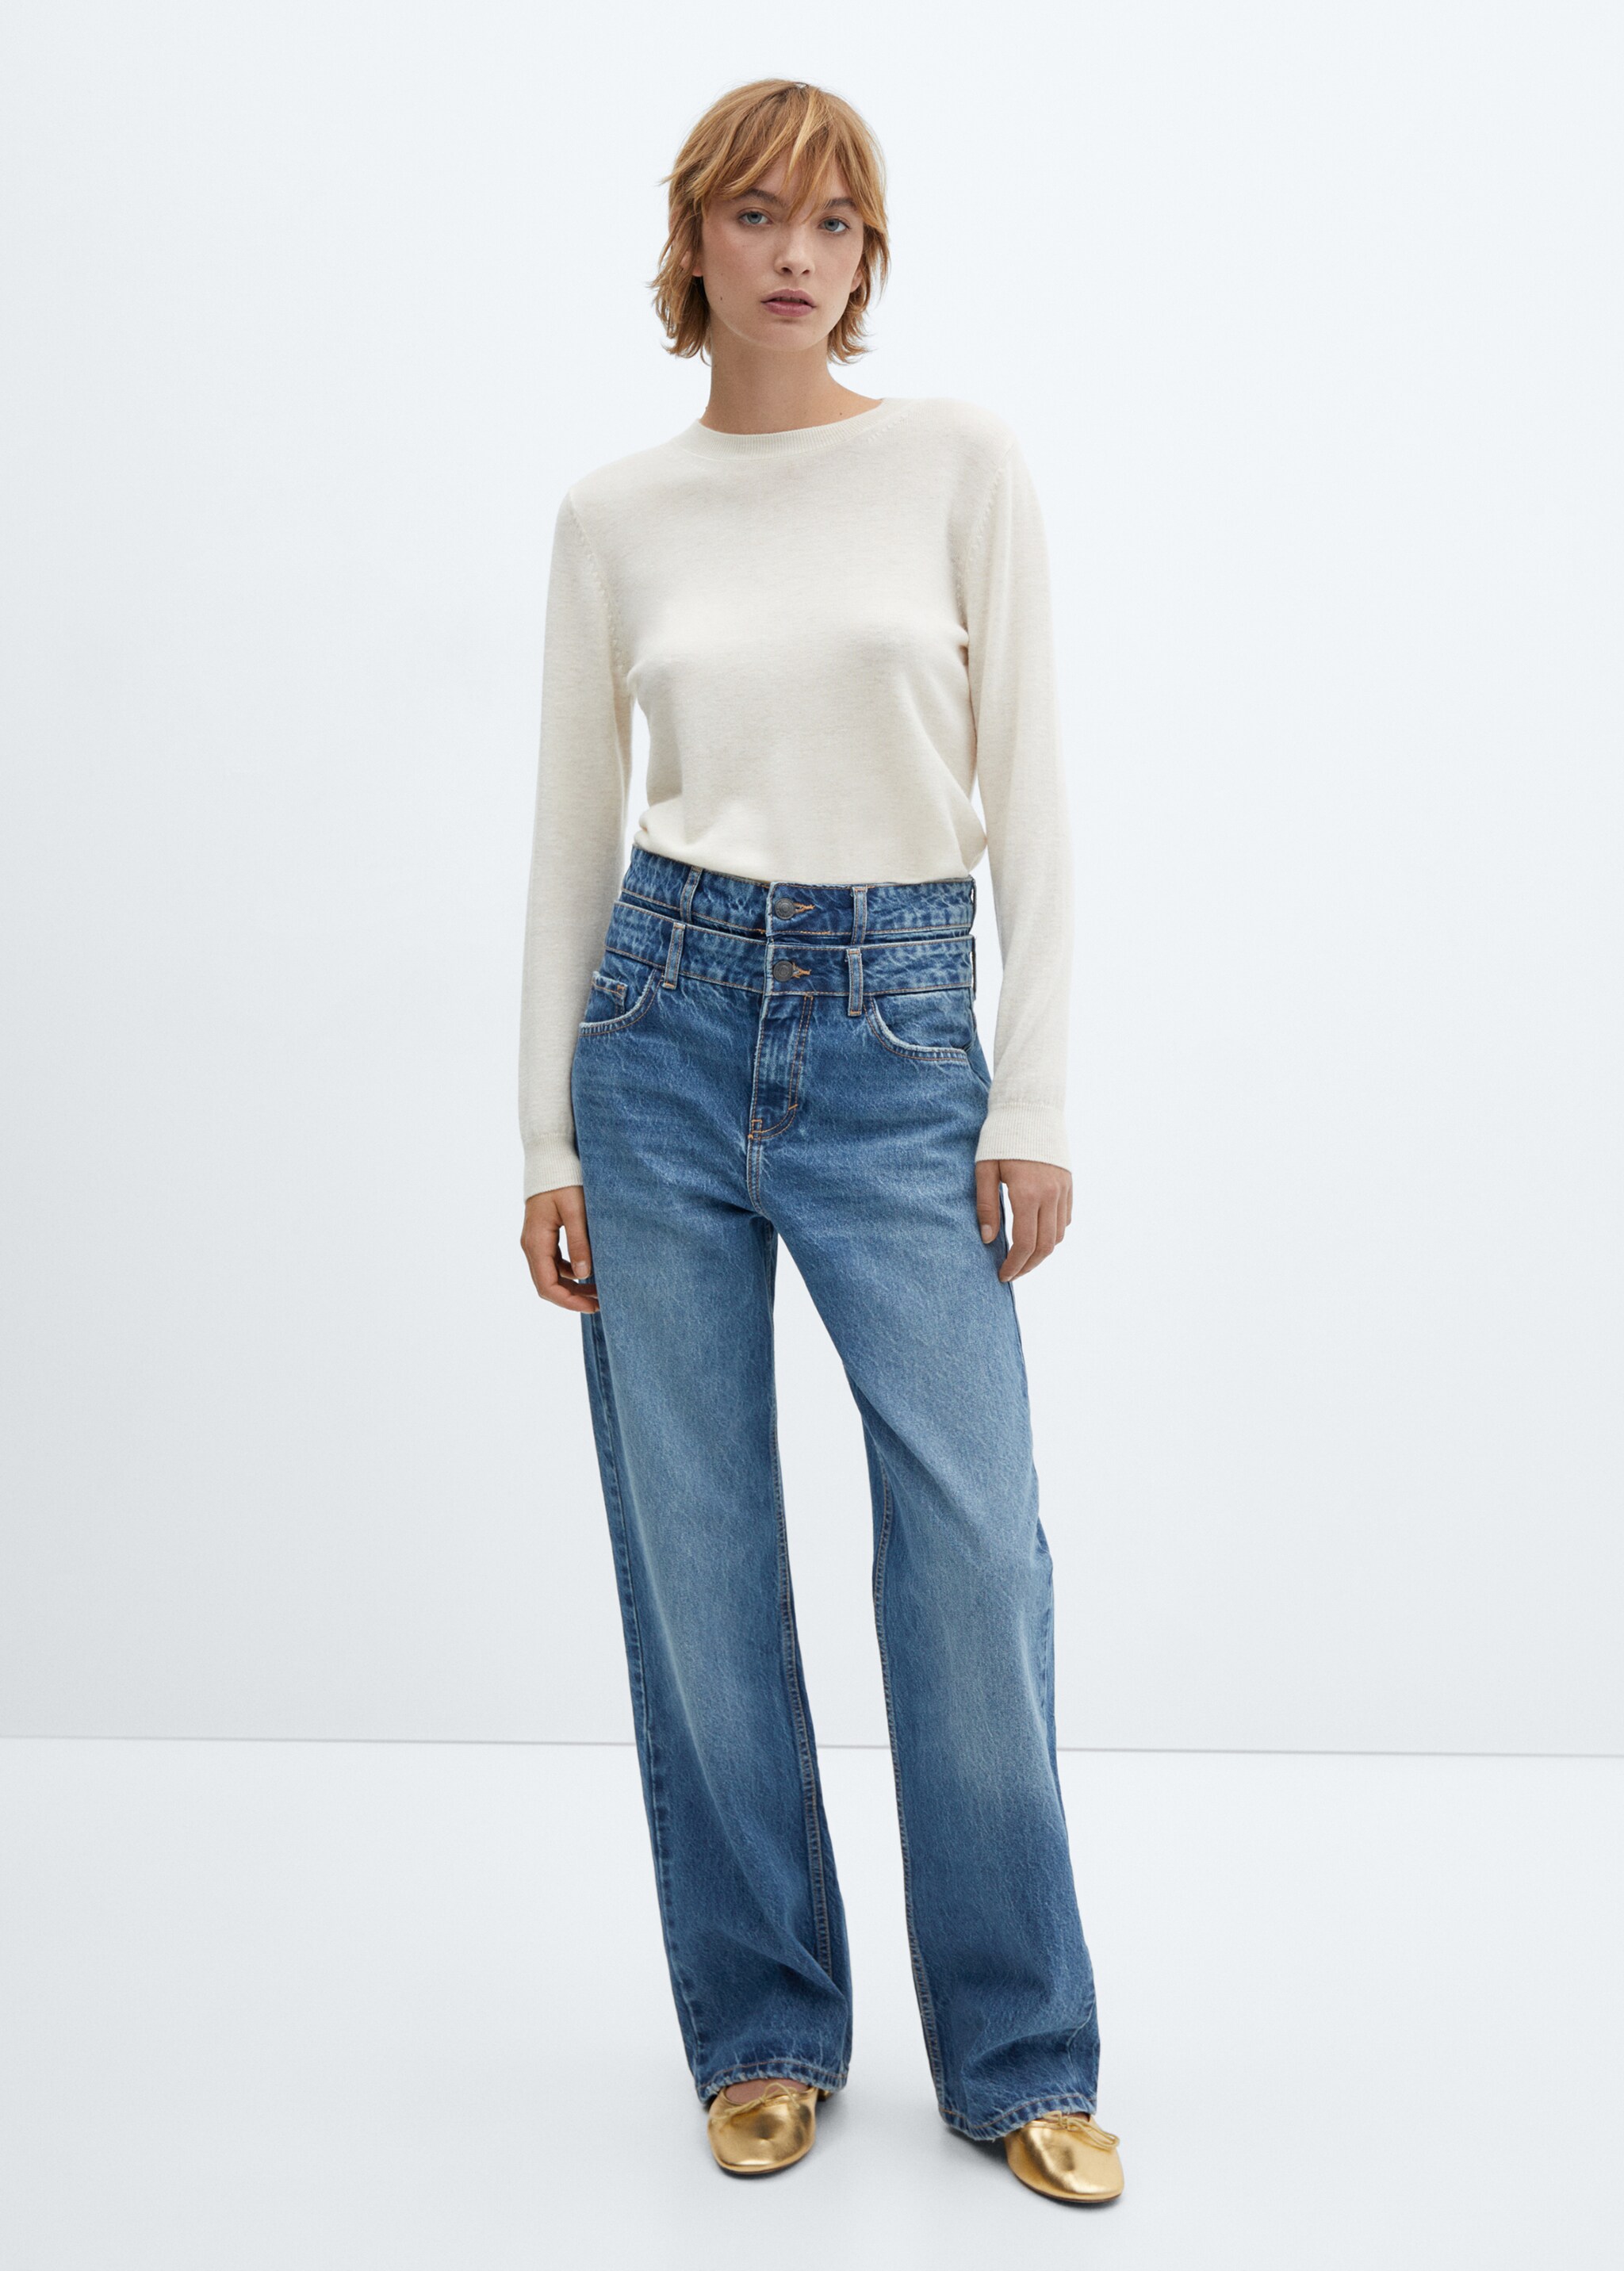 Double-waist straight jeans - General plane